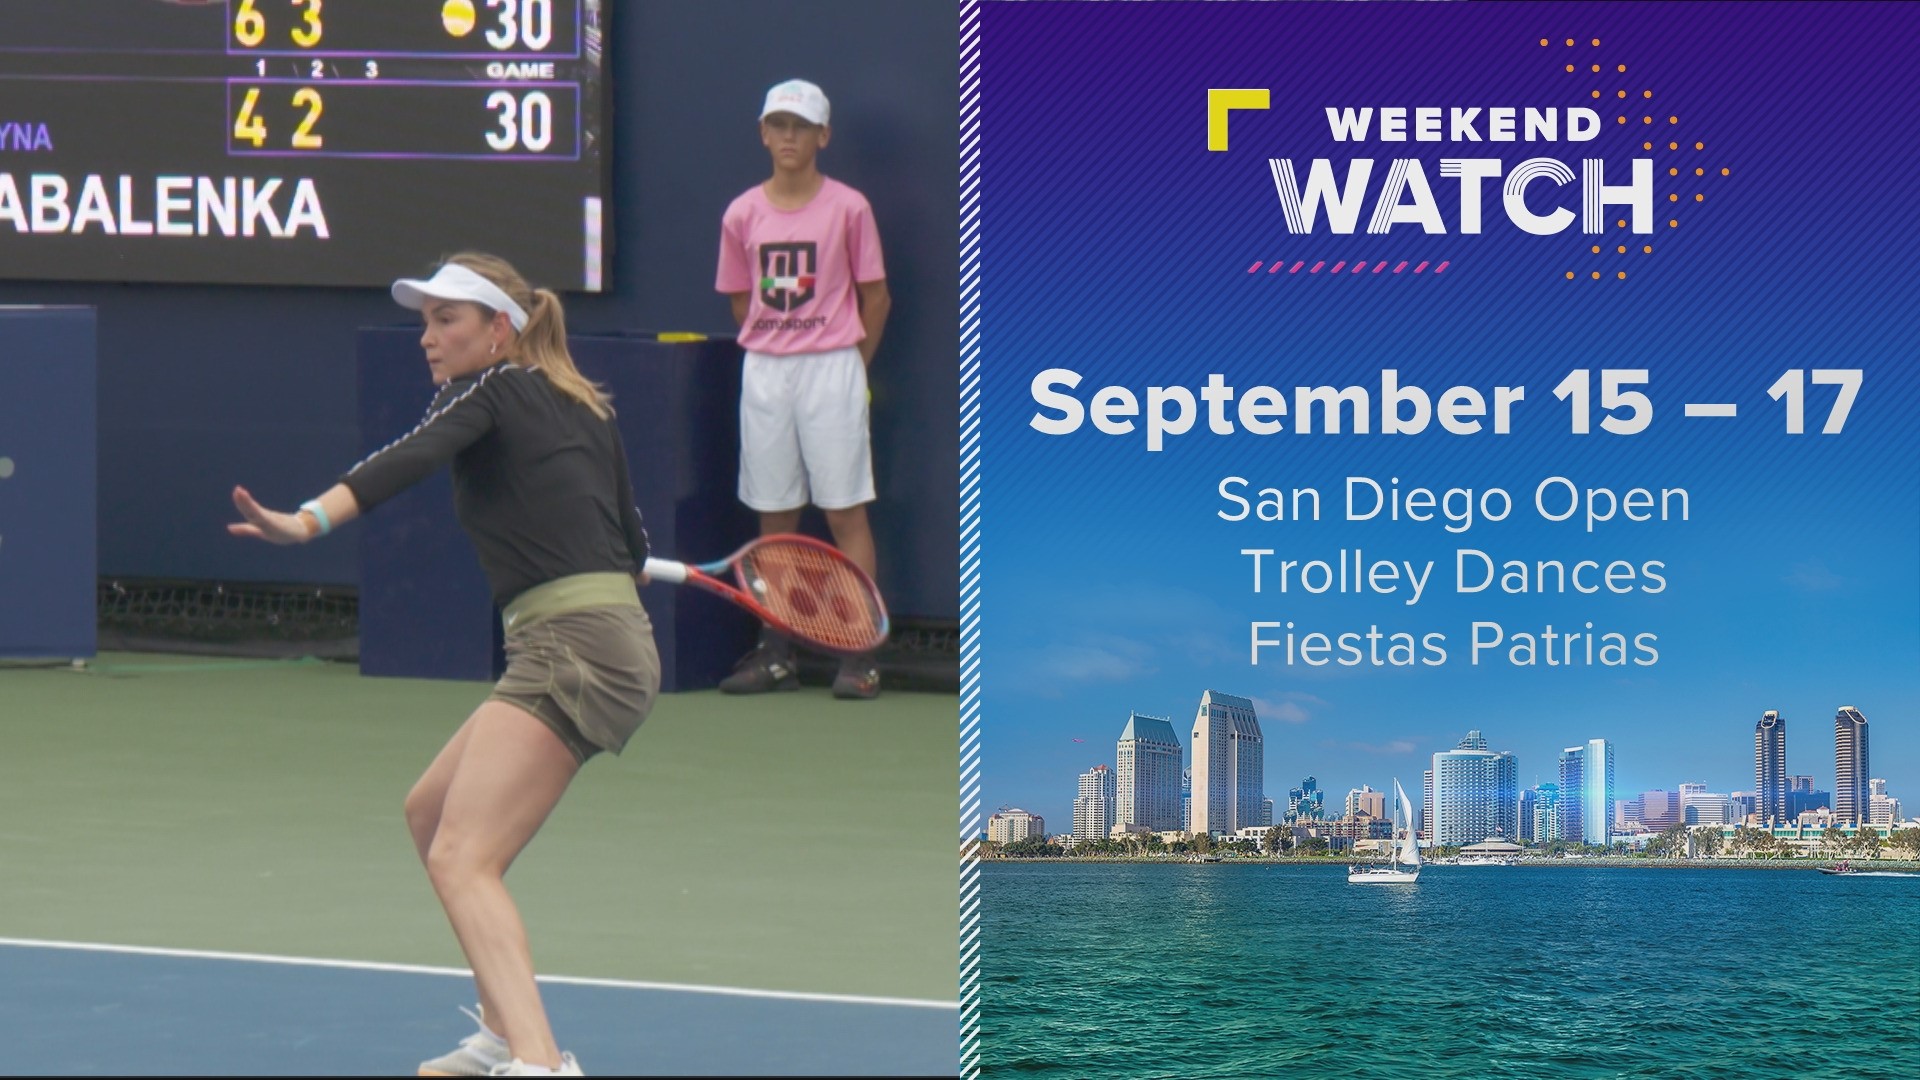 As always, there is so much to do this weekend in San Diego! Here are a few things you won't want to miss.